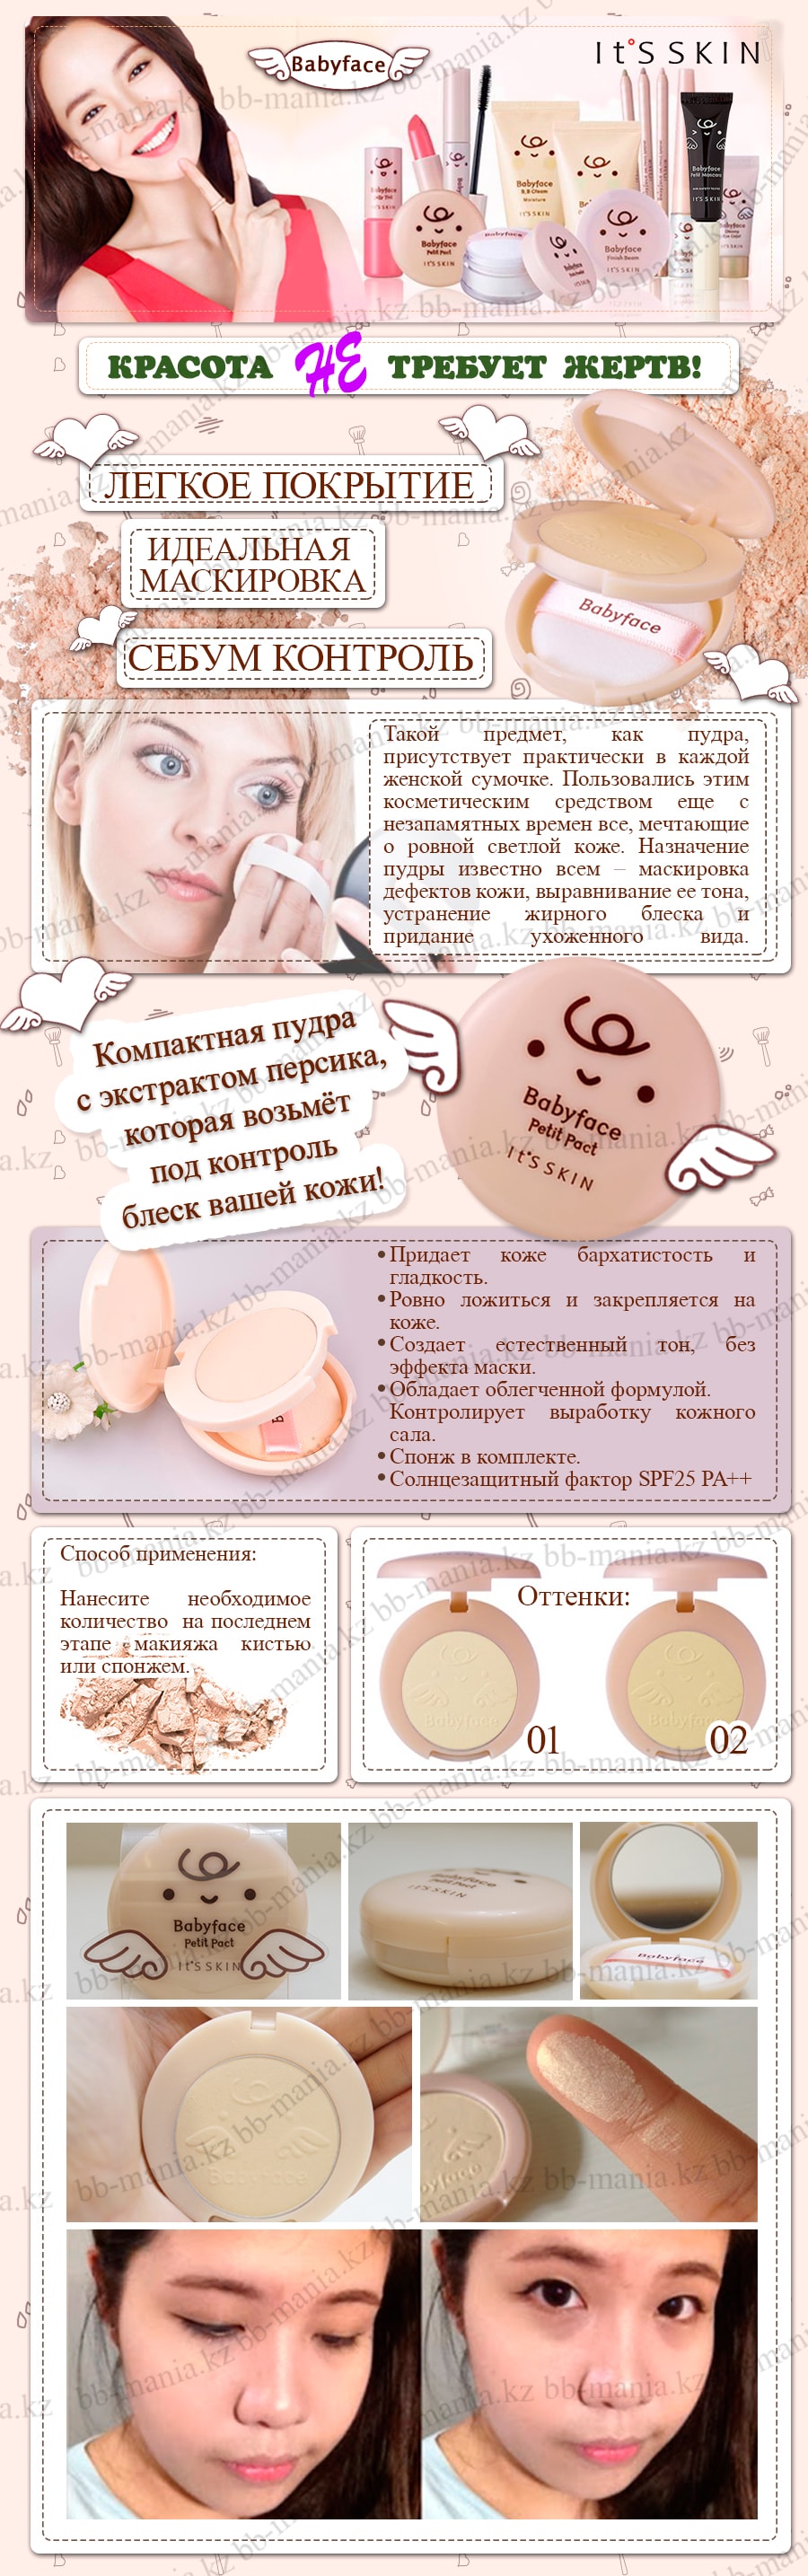 Baby-Face-Petit-Pact-SPF-25-[It's-Skin]-min